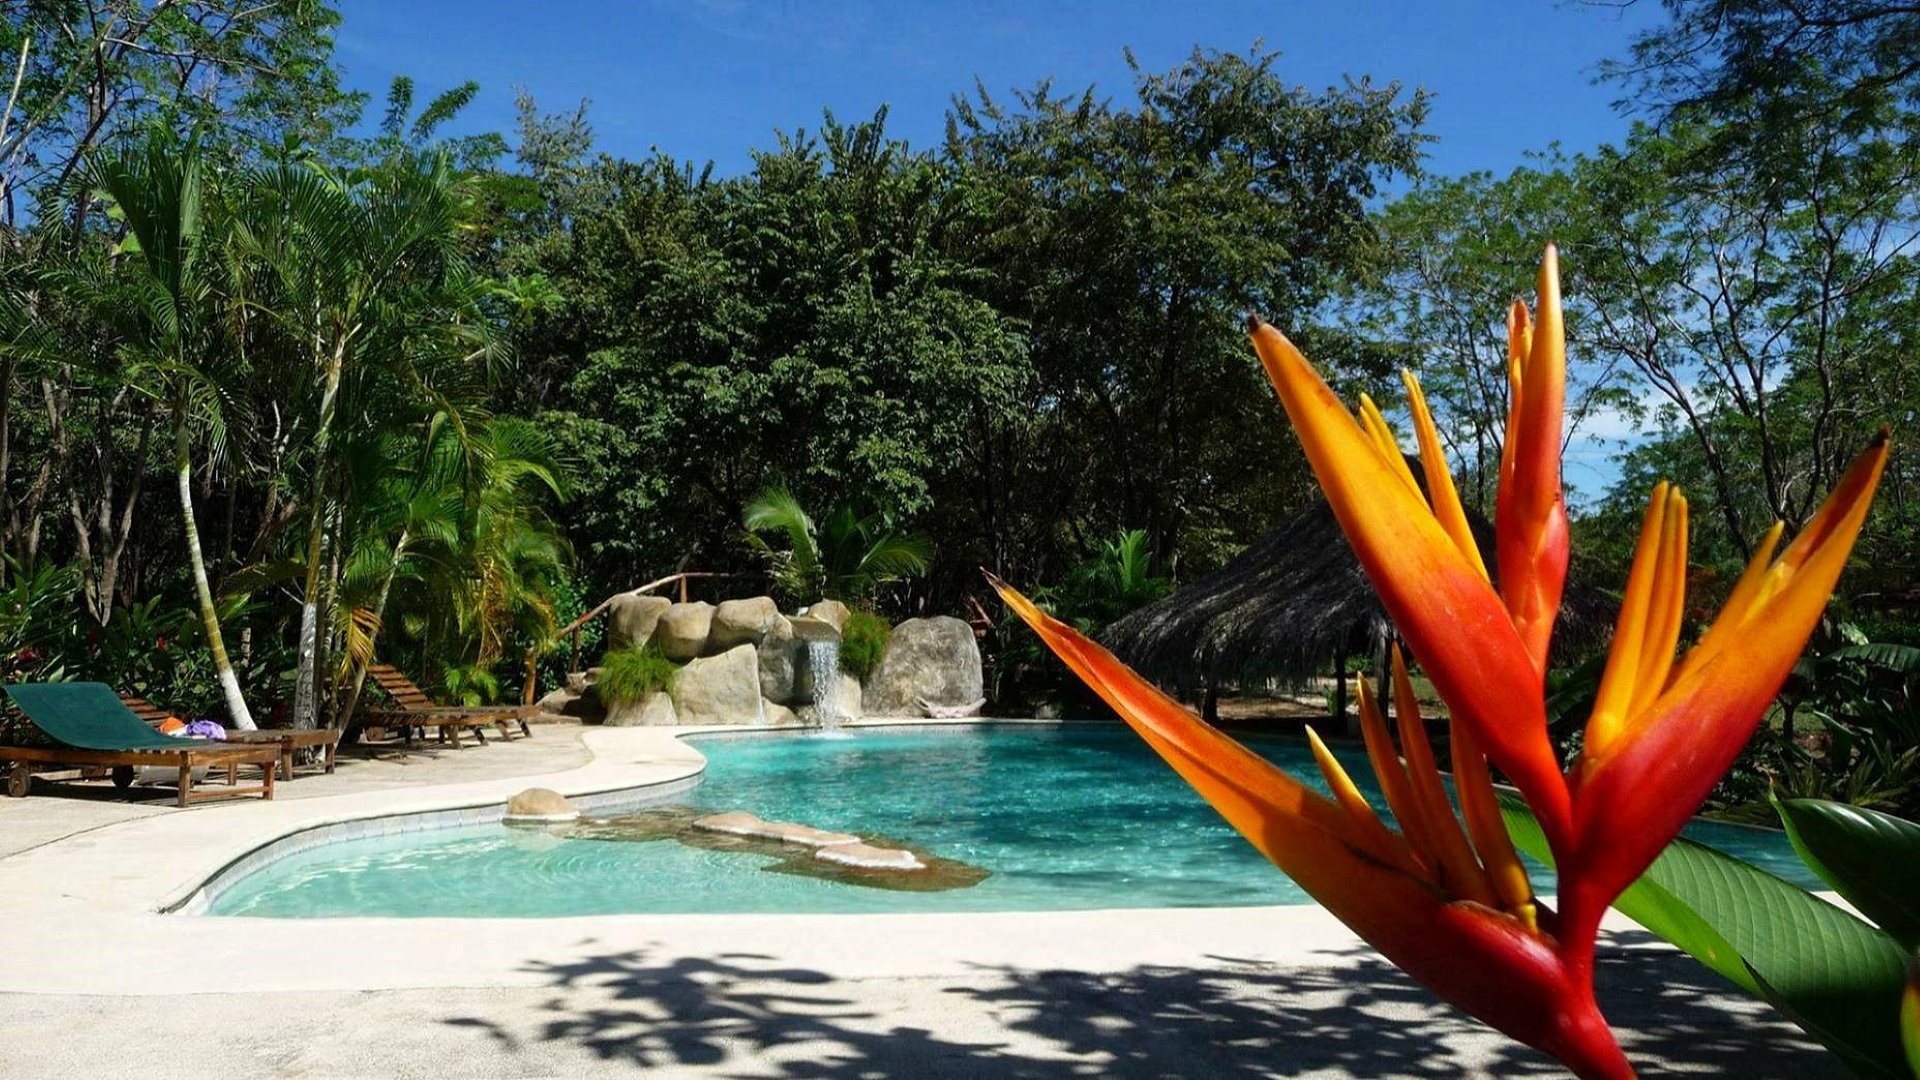 2200-The swimming pool of the property for sale on the Pacific Coast of Costa Rica